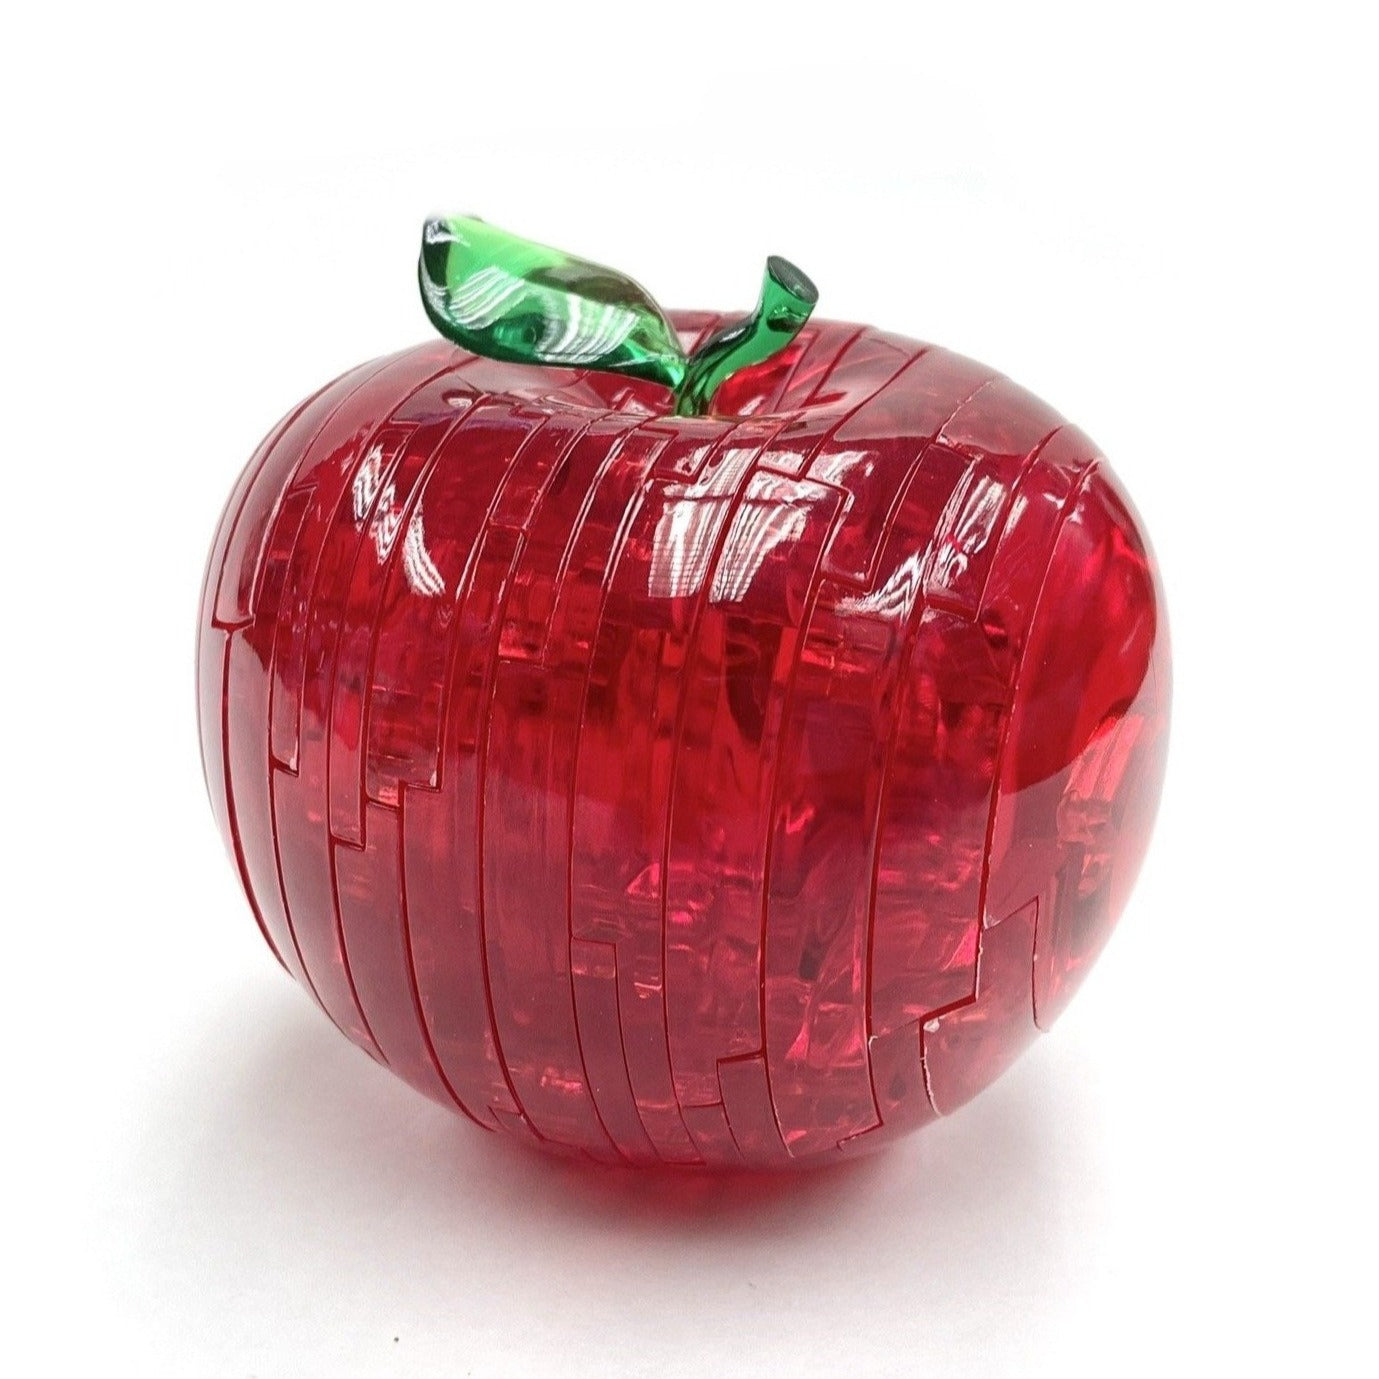 Apple (Red) Dimension: 75mm x 75mm x 75mm  Color: Green/Red  Number of Pieces: 44  Weight: 220g